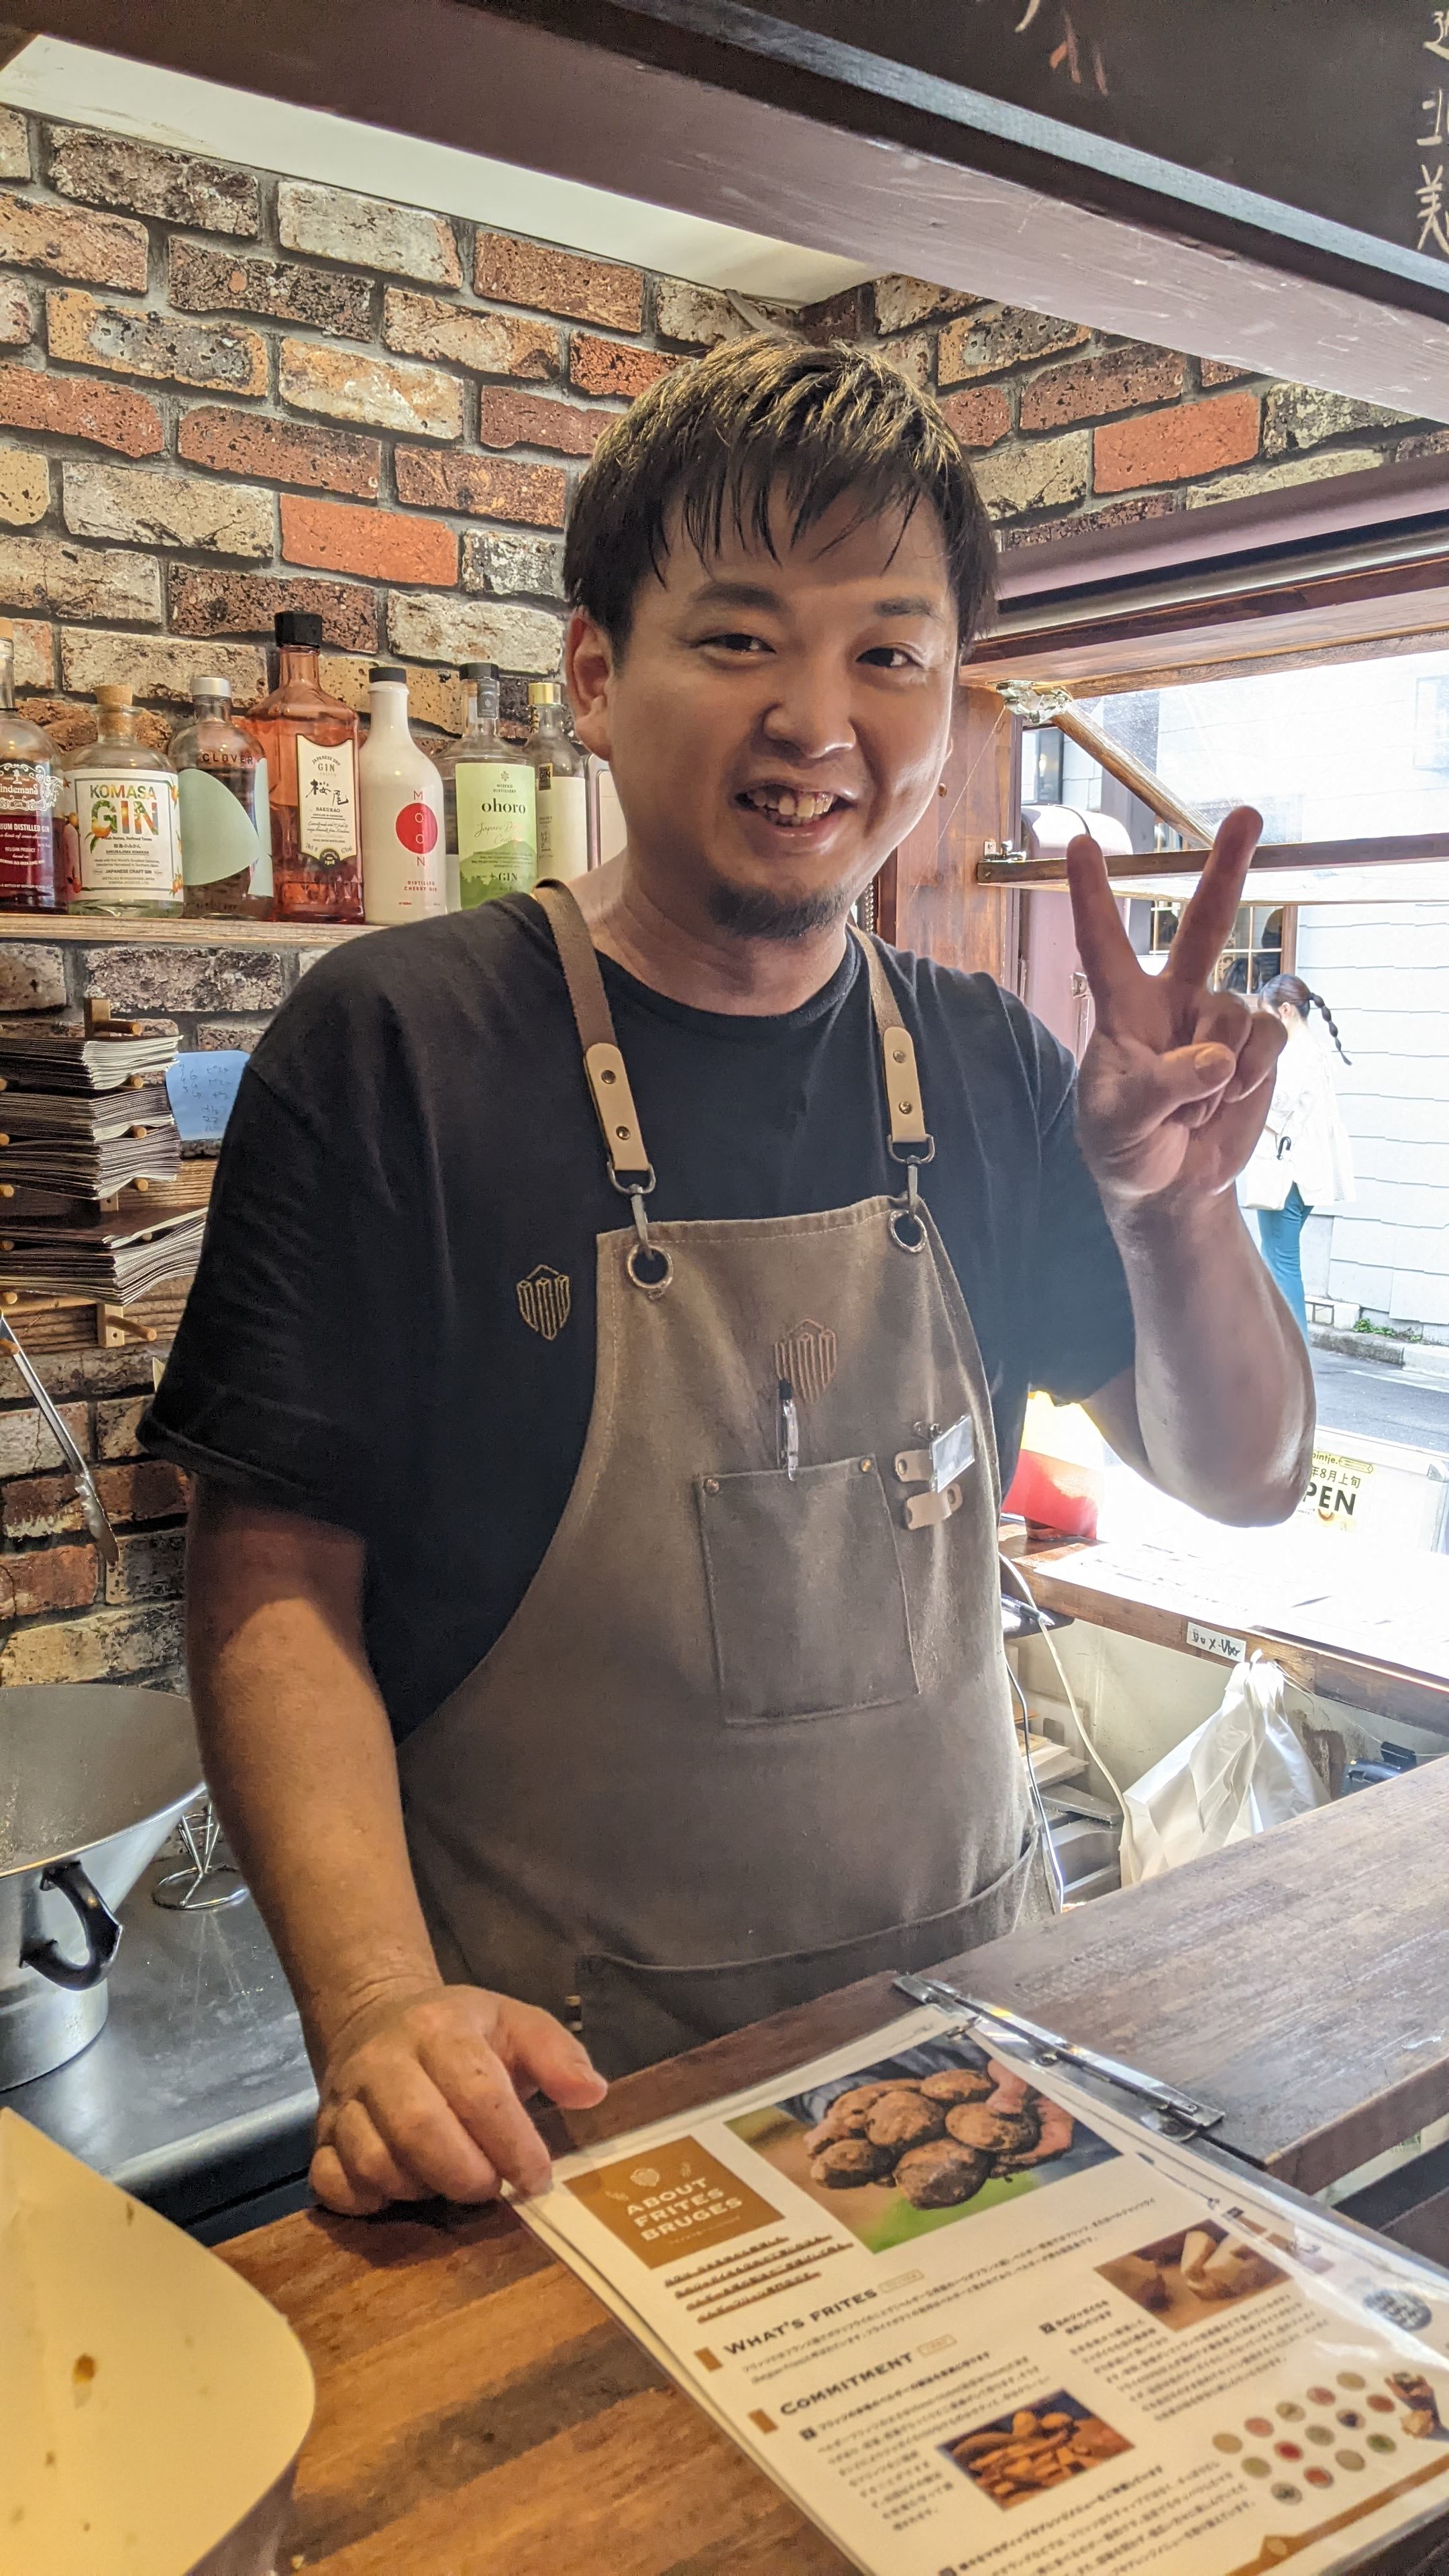 The owner smiling and showing a peace sign